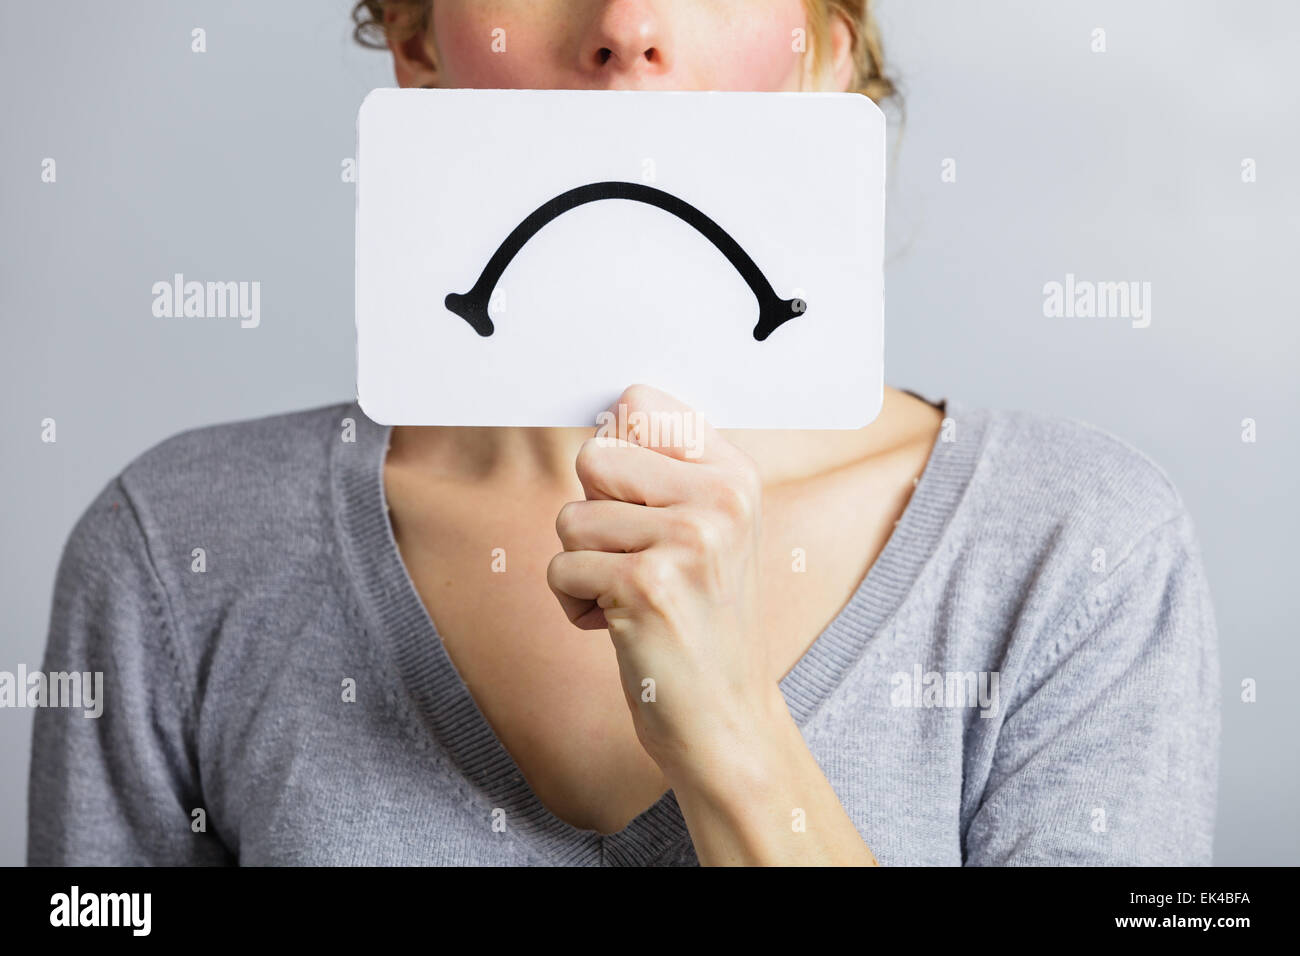 Unhappy Portrait of a Woman Holding a Sad Mood Board Stock Photo